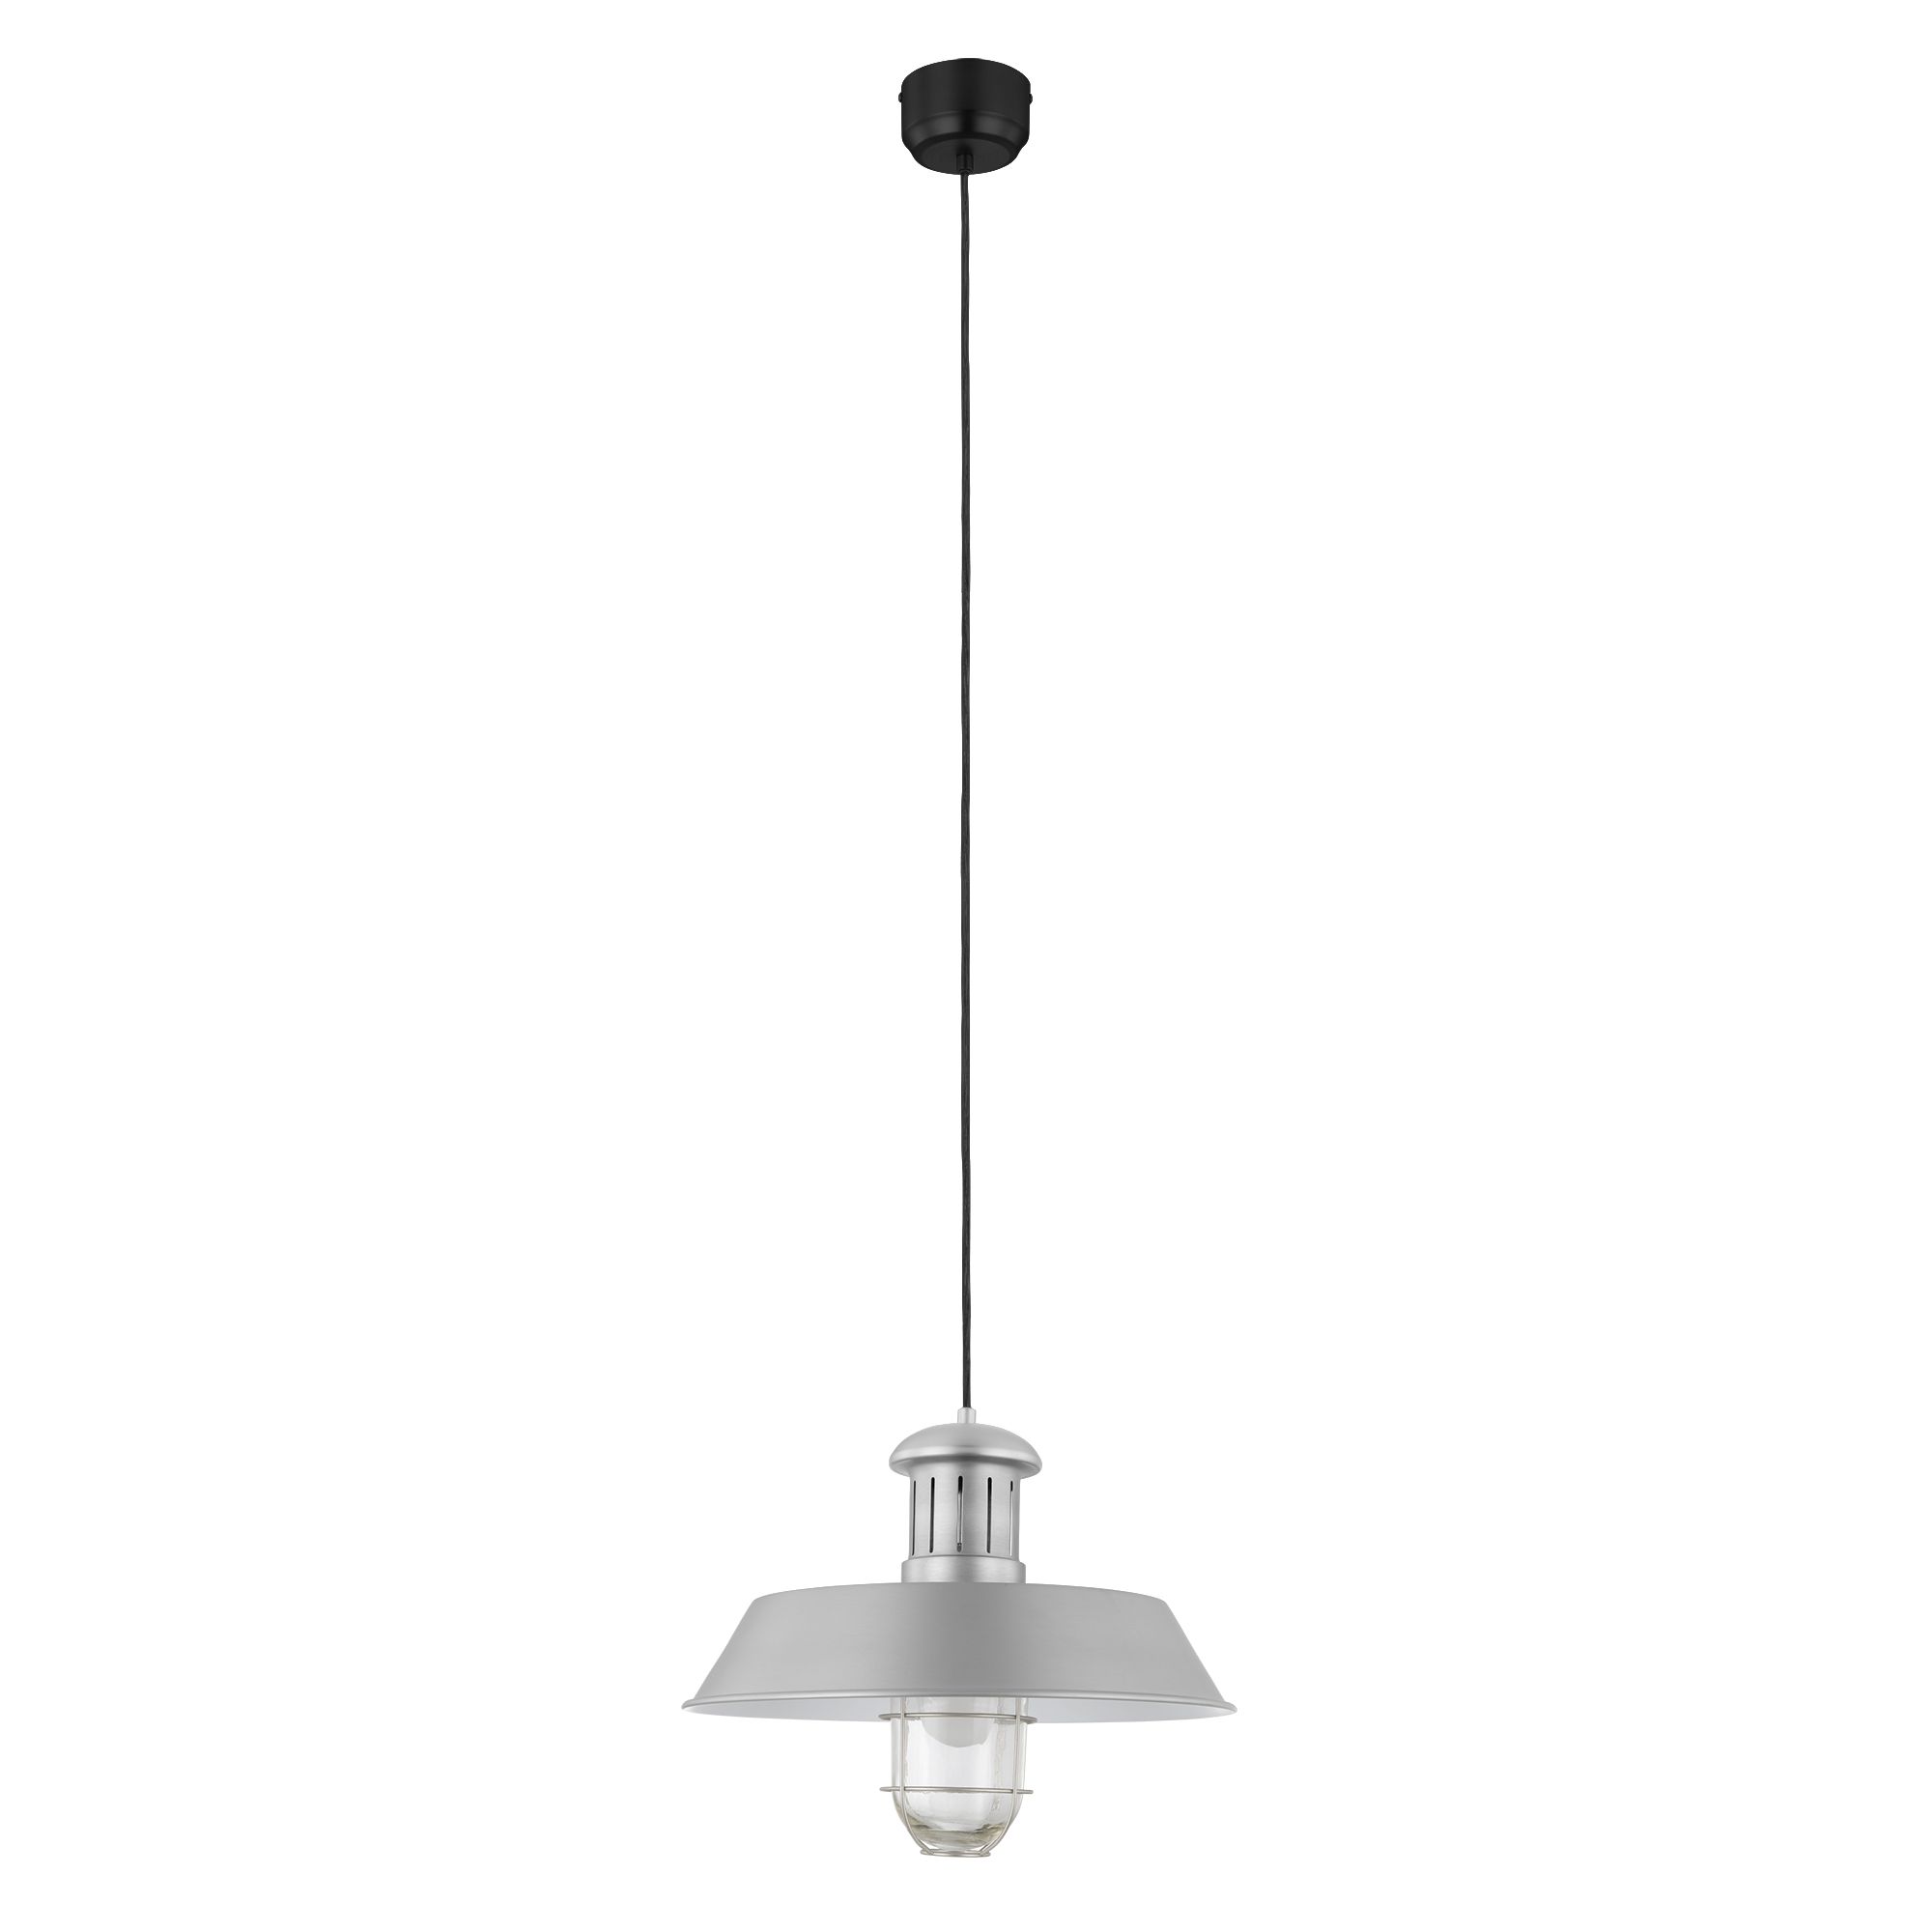 GoodHome Genly Silver effect Pendant ceiling light, (Dia)390mm